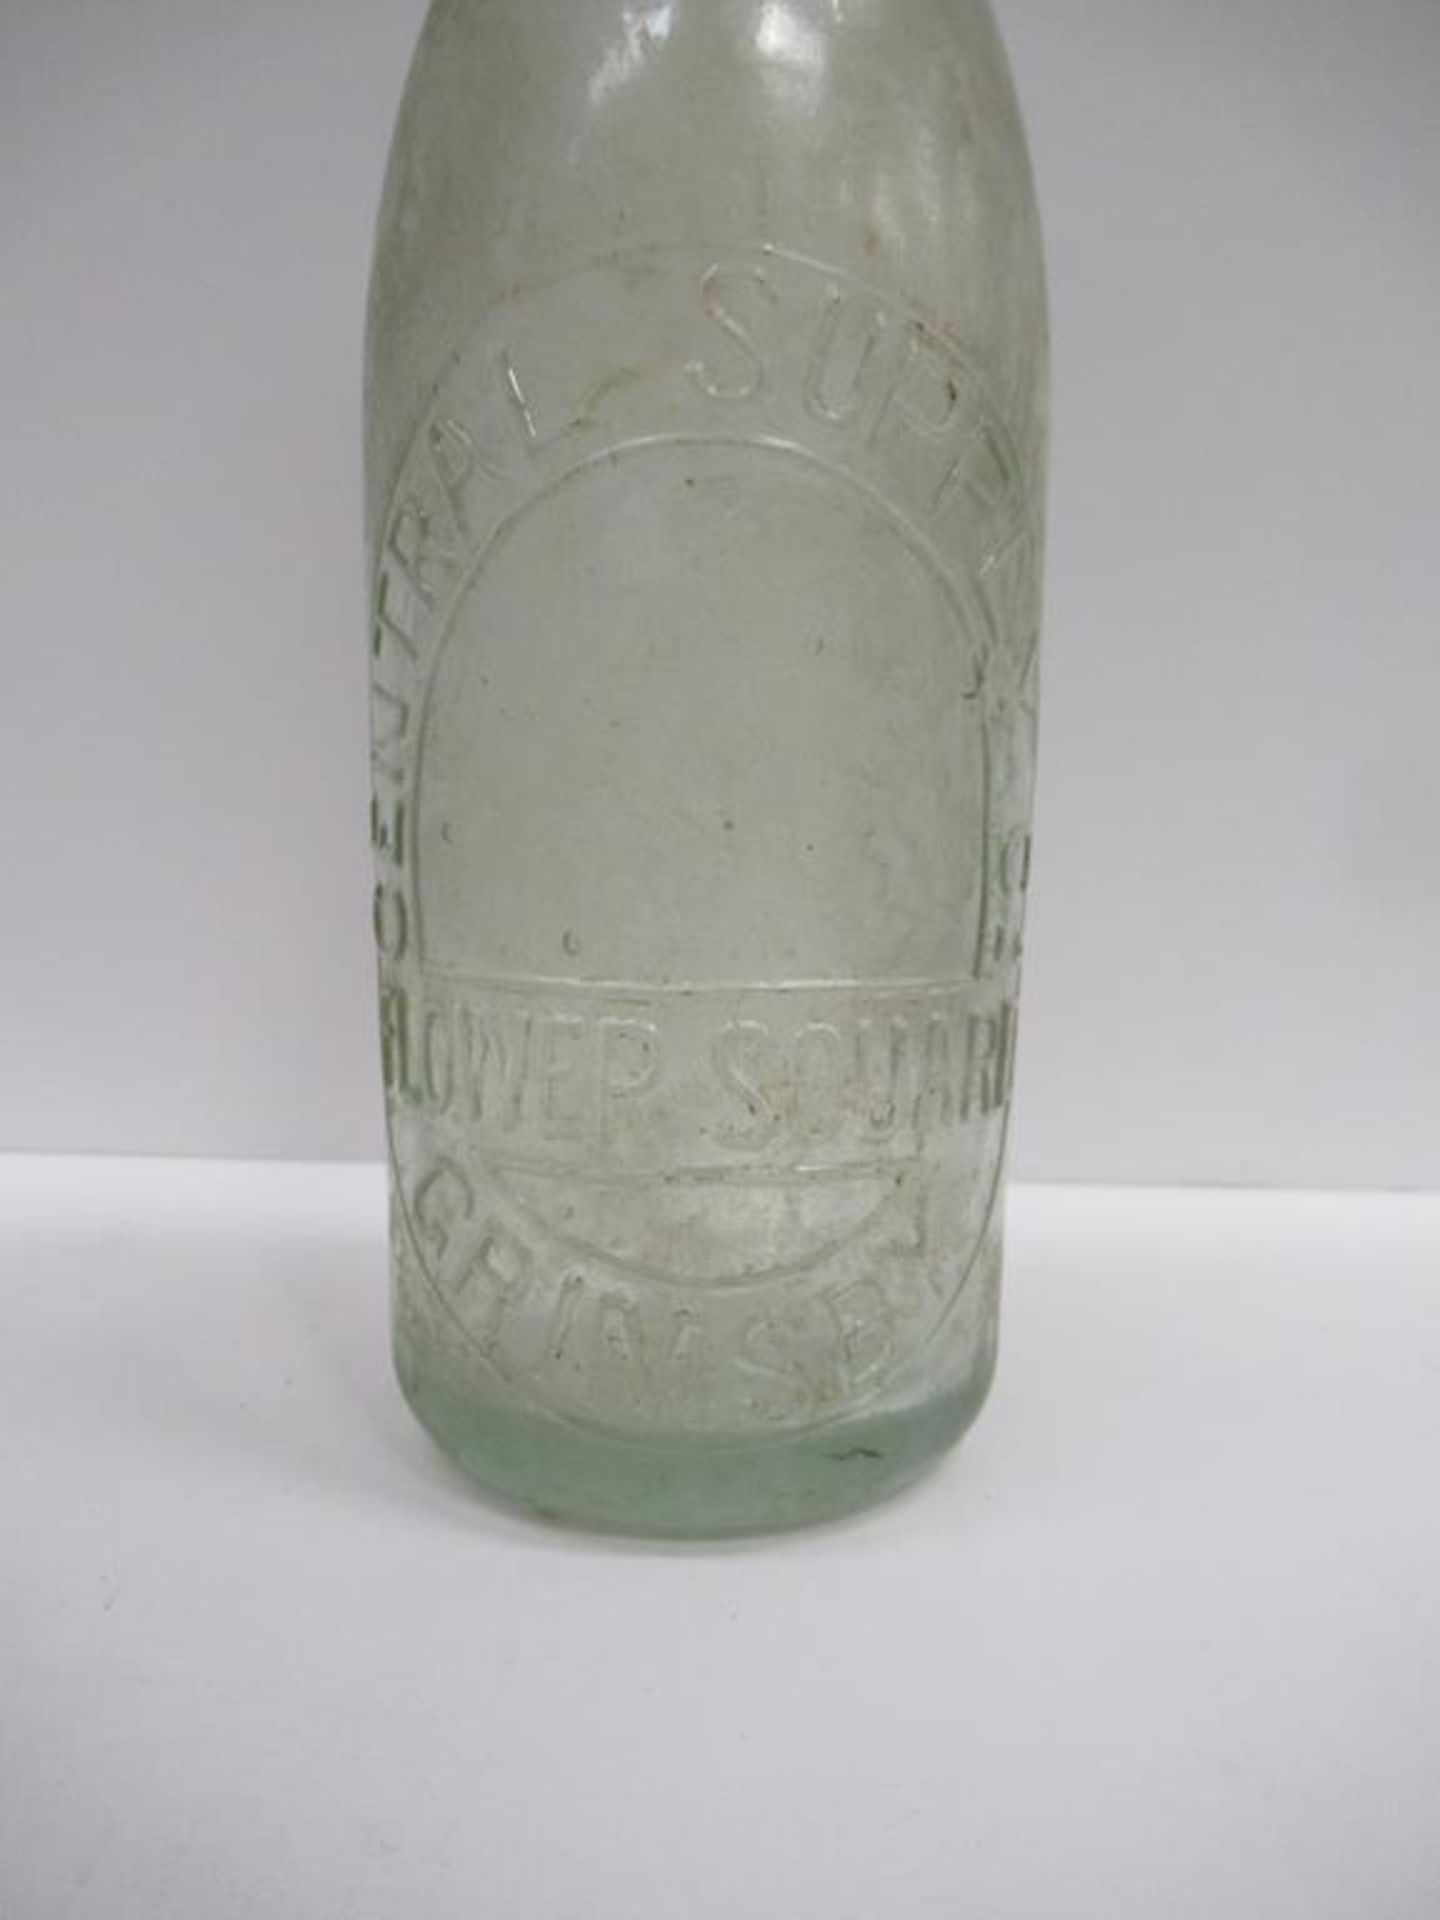 4x Grimsby Central Supply Co (2), Warwicks Cash Stores (1) and H.J. Curry bottles - Image 11 of 13